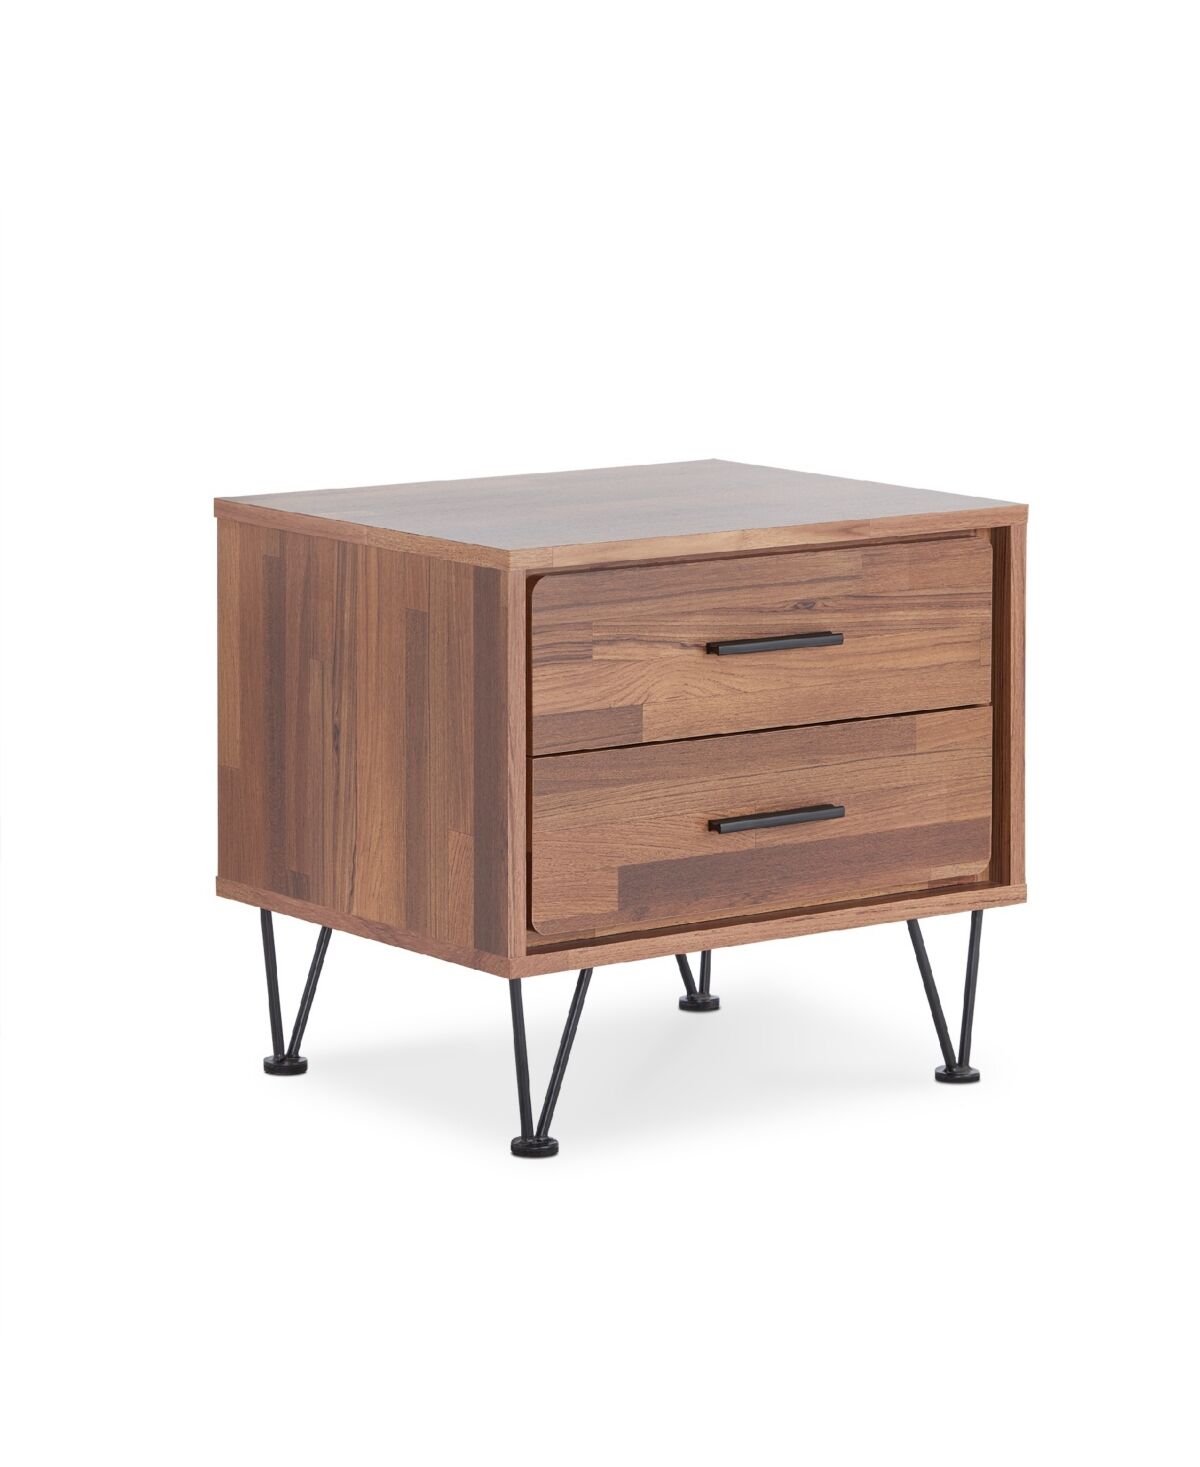 Acme Furniture Deoss Accent Table - Walnut